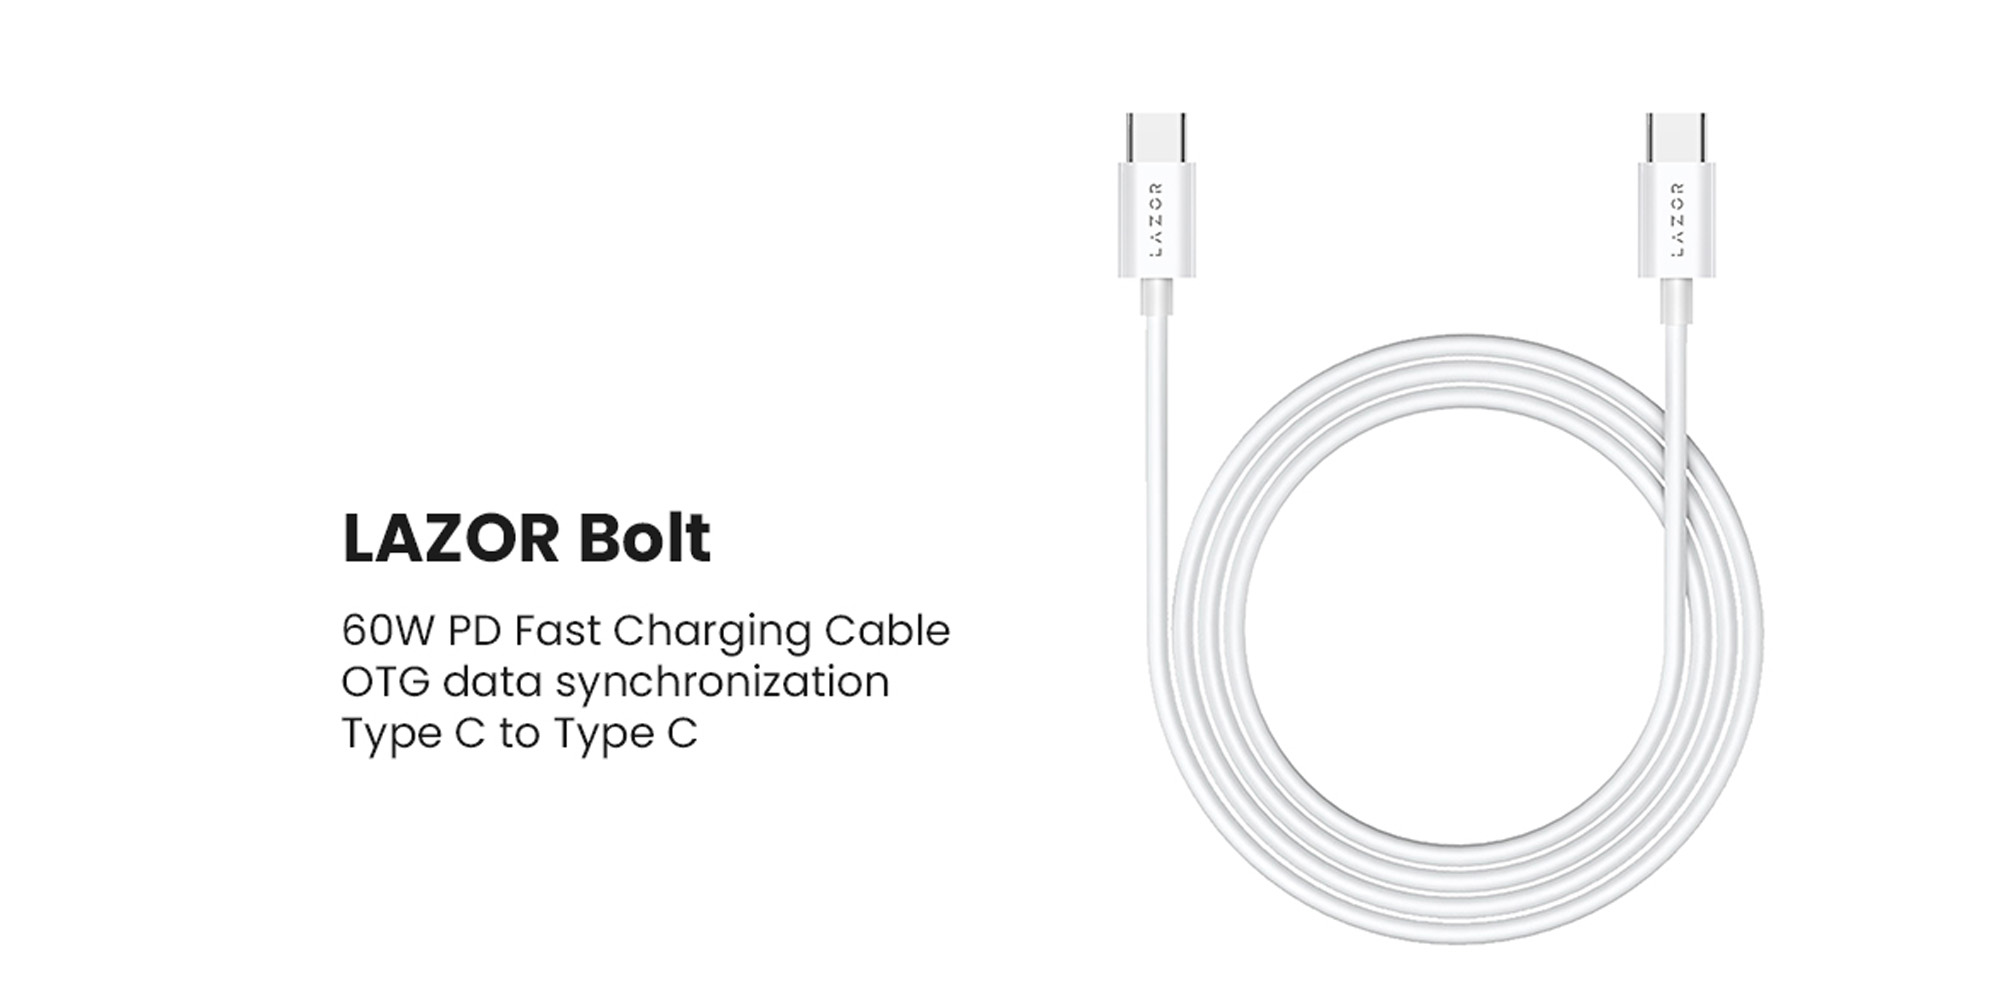 LAZOR Bolt CT76: Type-C to Type-C 60W PD Fast Charging Cable, OTG Data Synchronization, SR Cable Bending Control - Gray, 1M